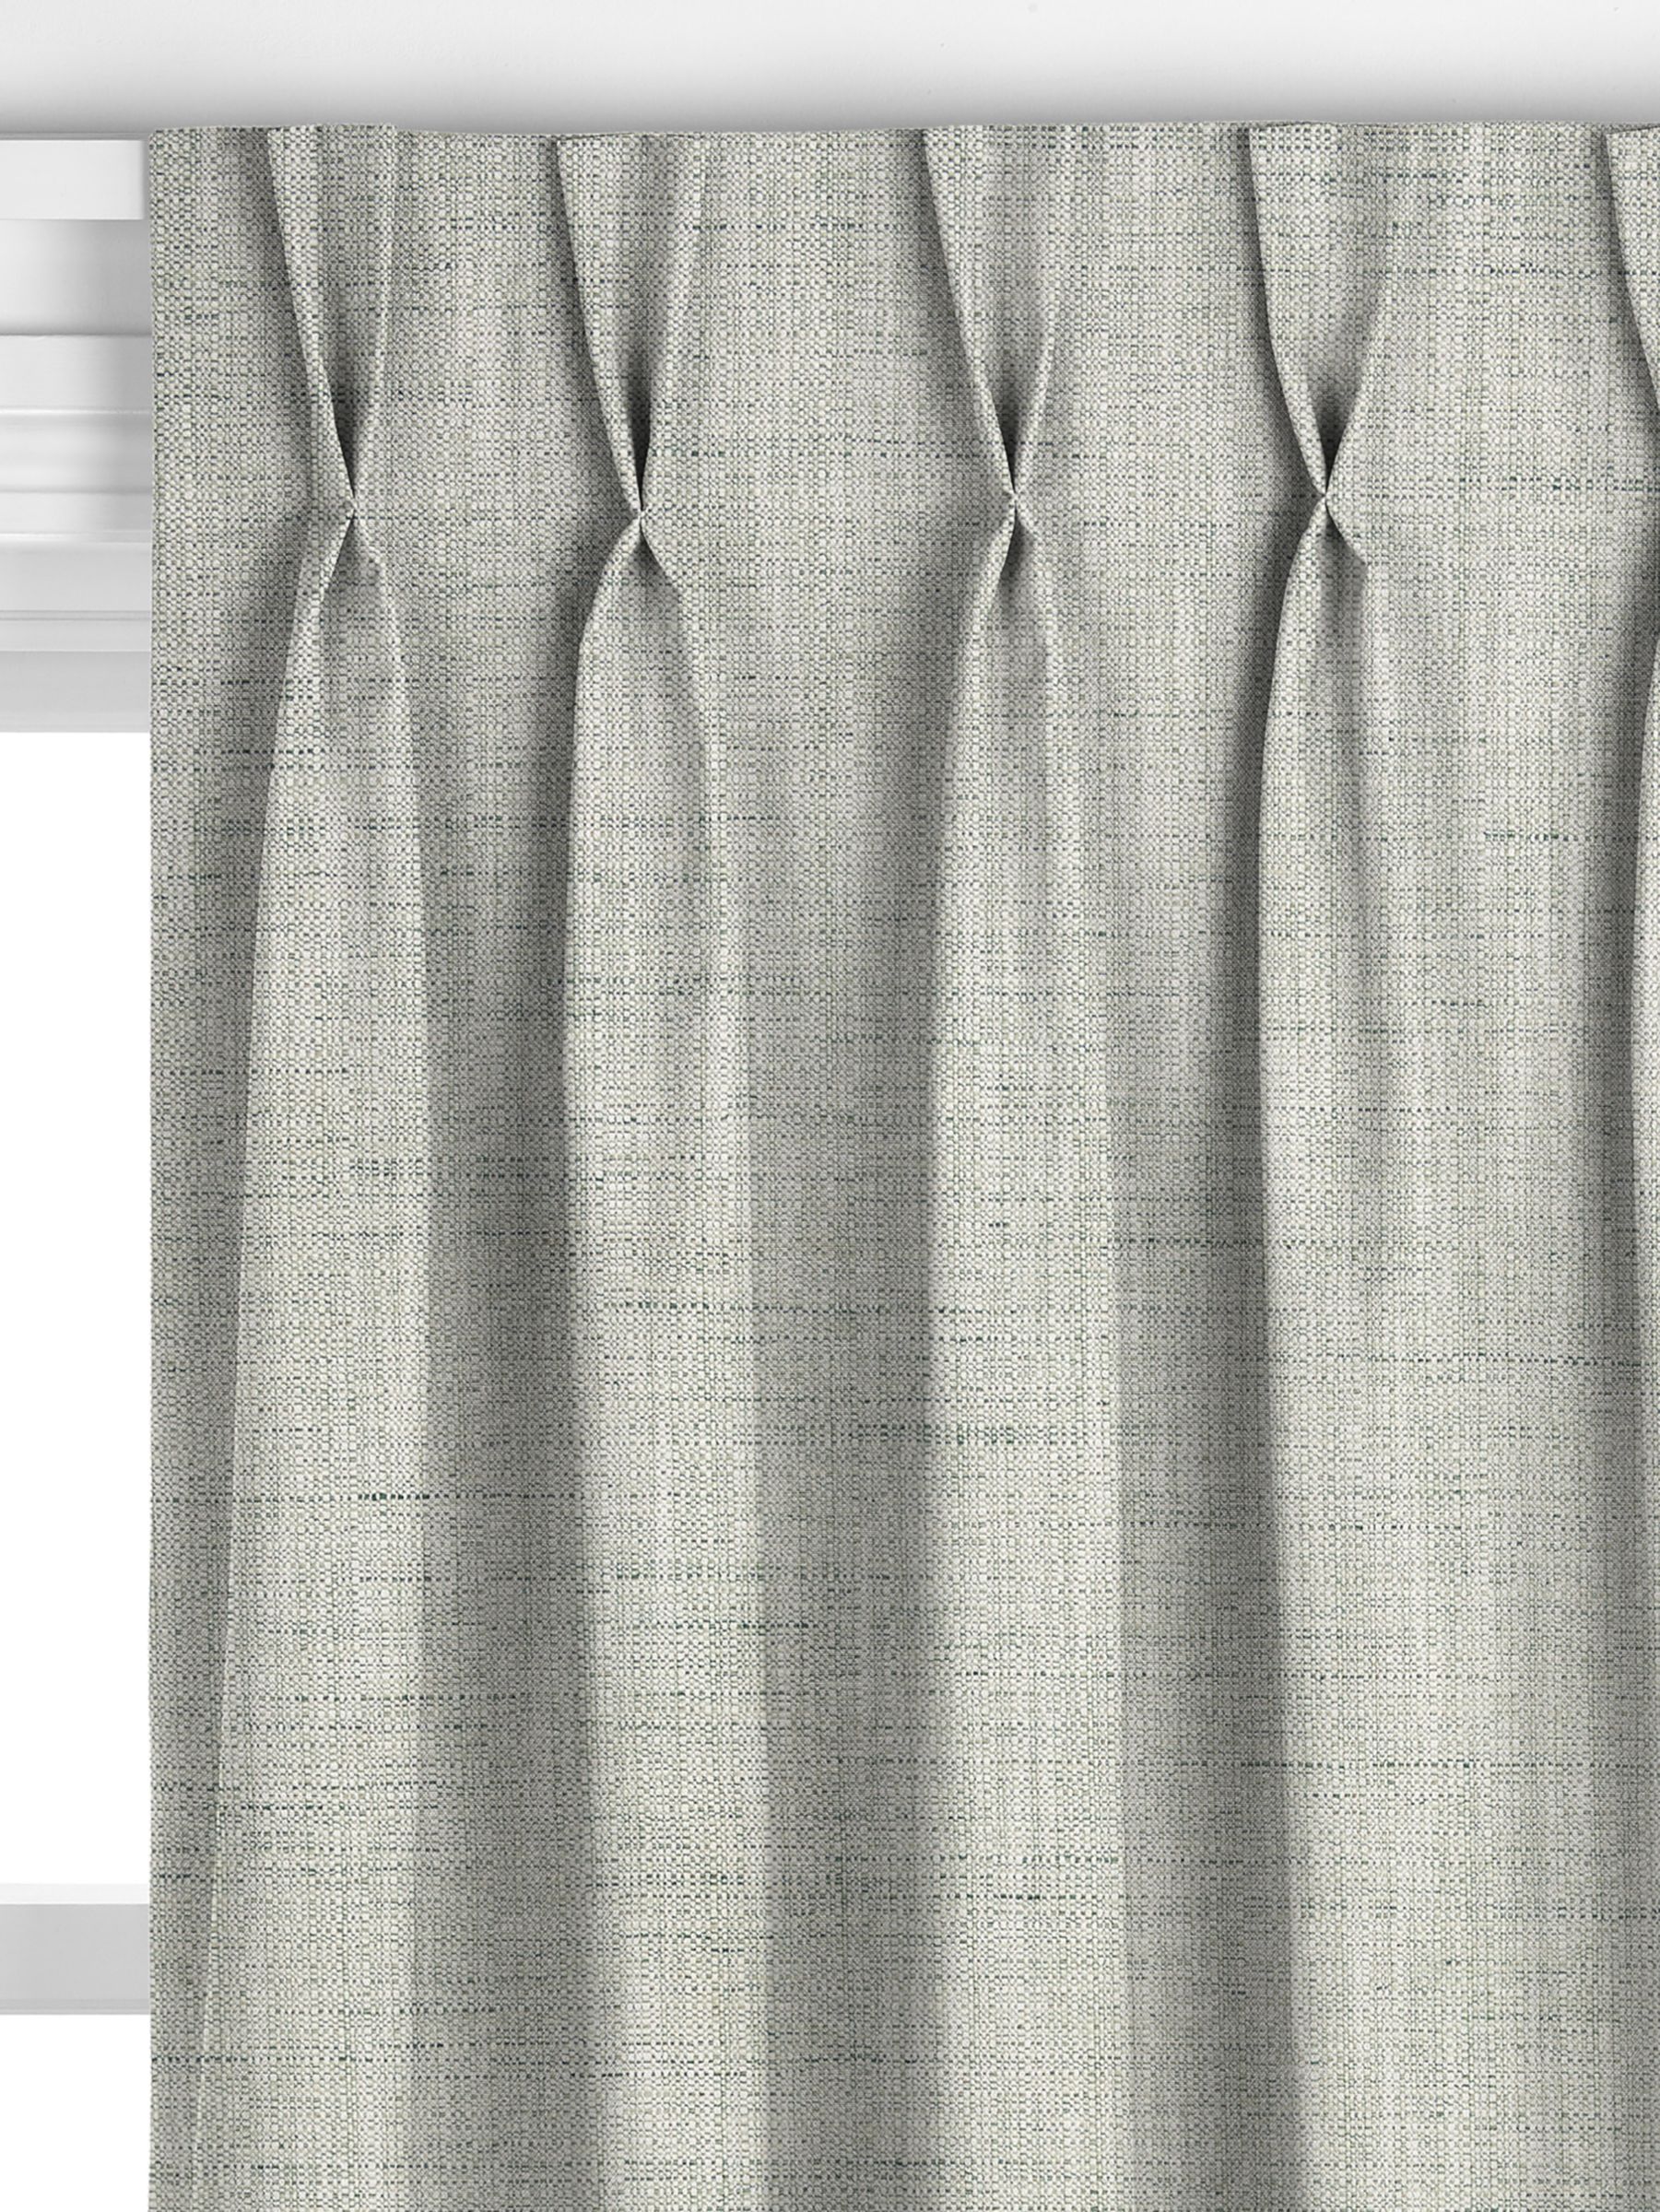 John Lewis Tonal Weave Made to Measure Curtains, Myrtle Green/Avocado